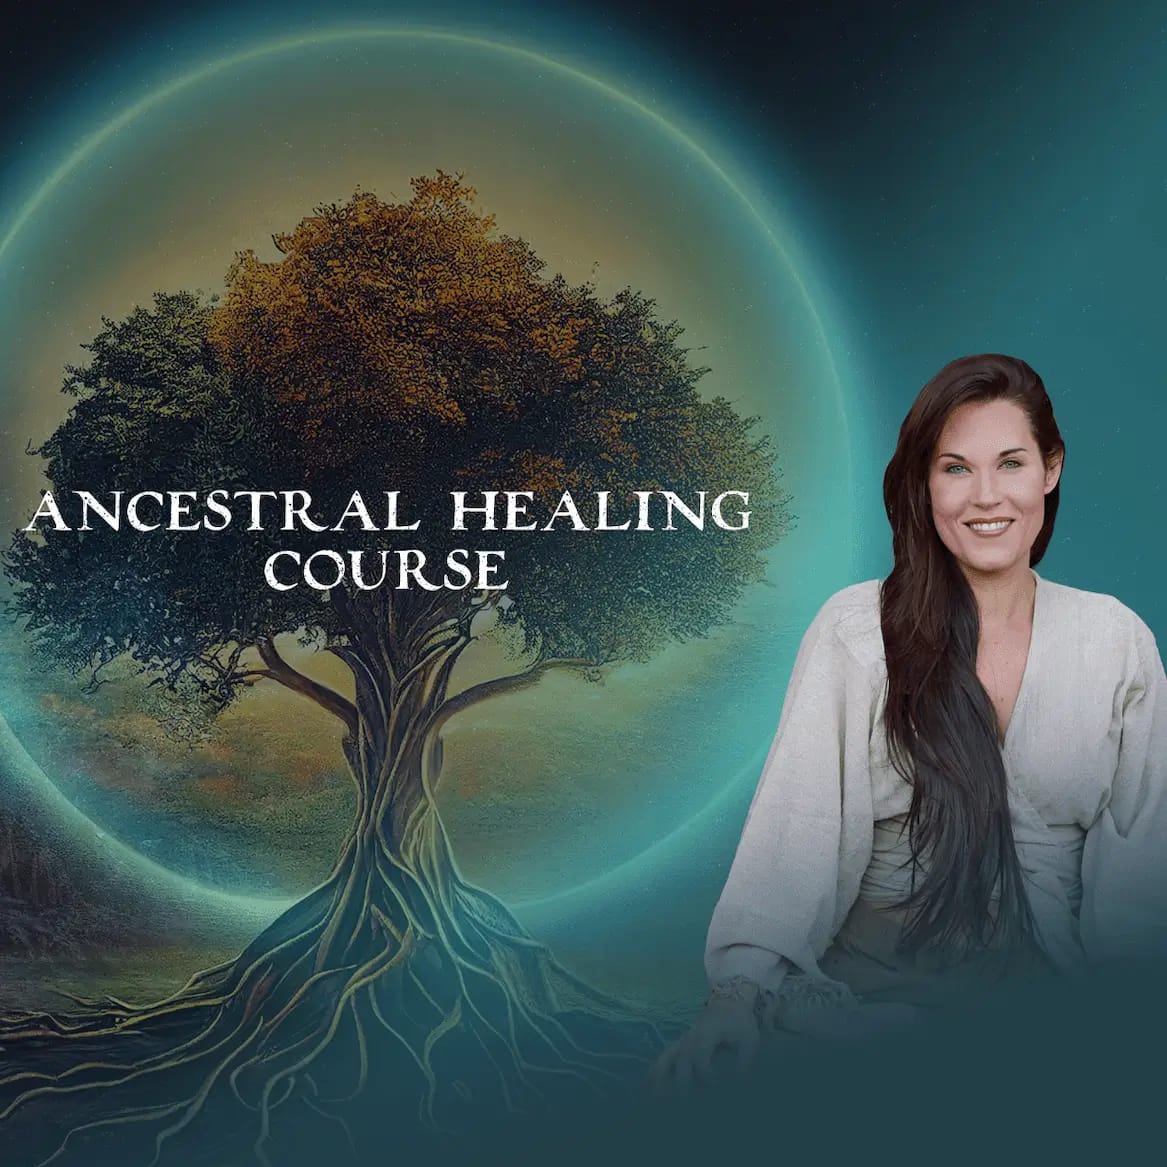 Teal Swan: Ancestral Healing Course